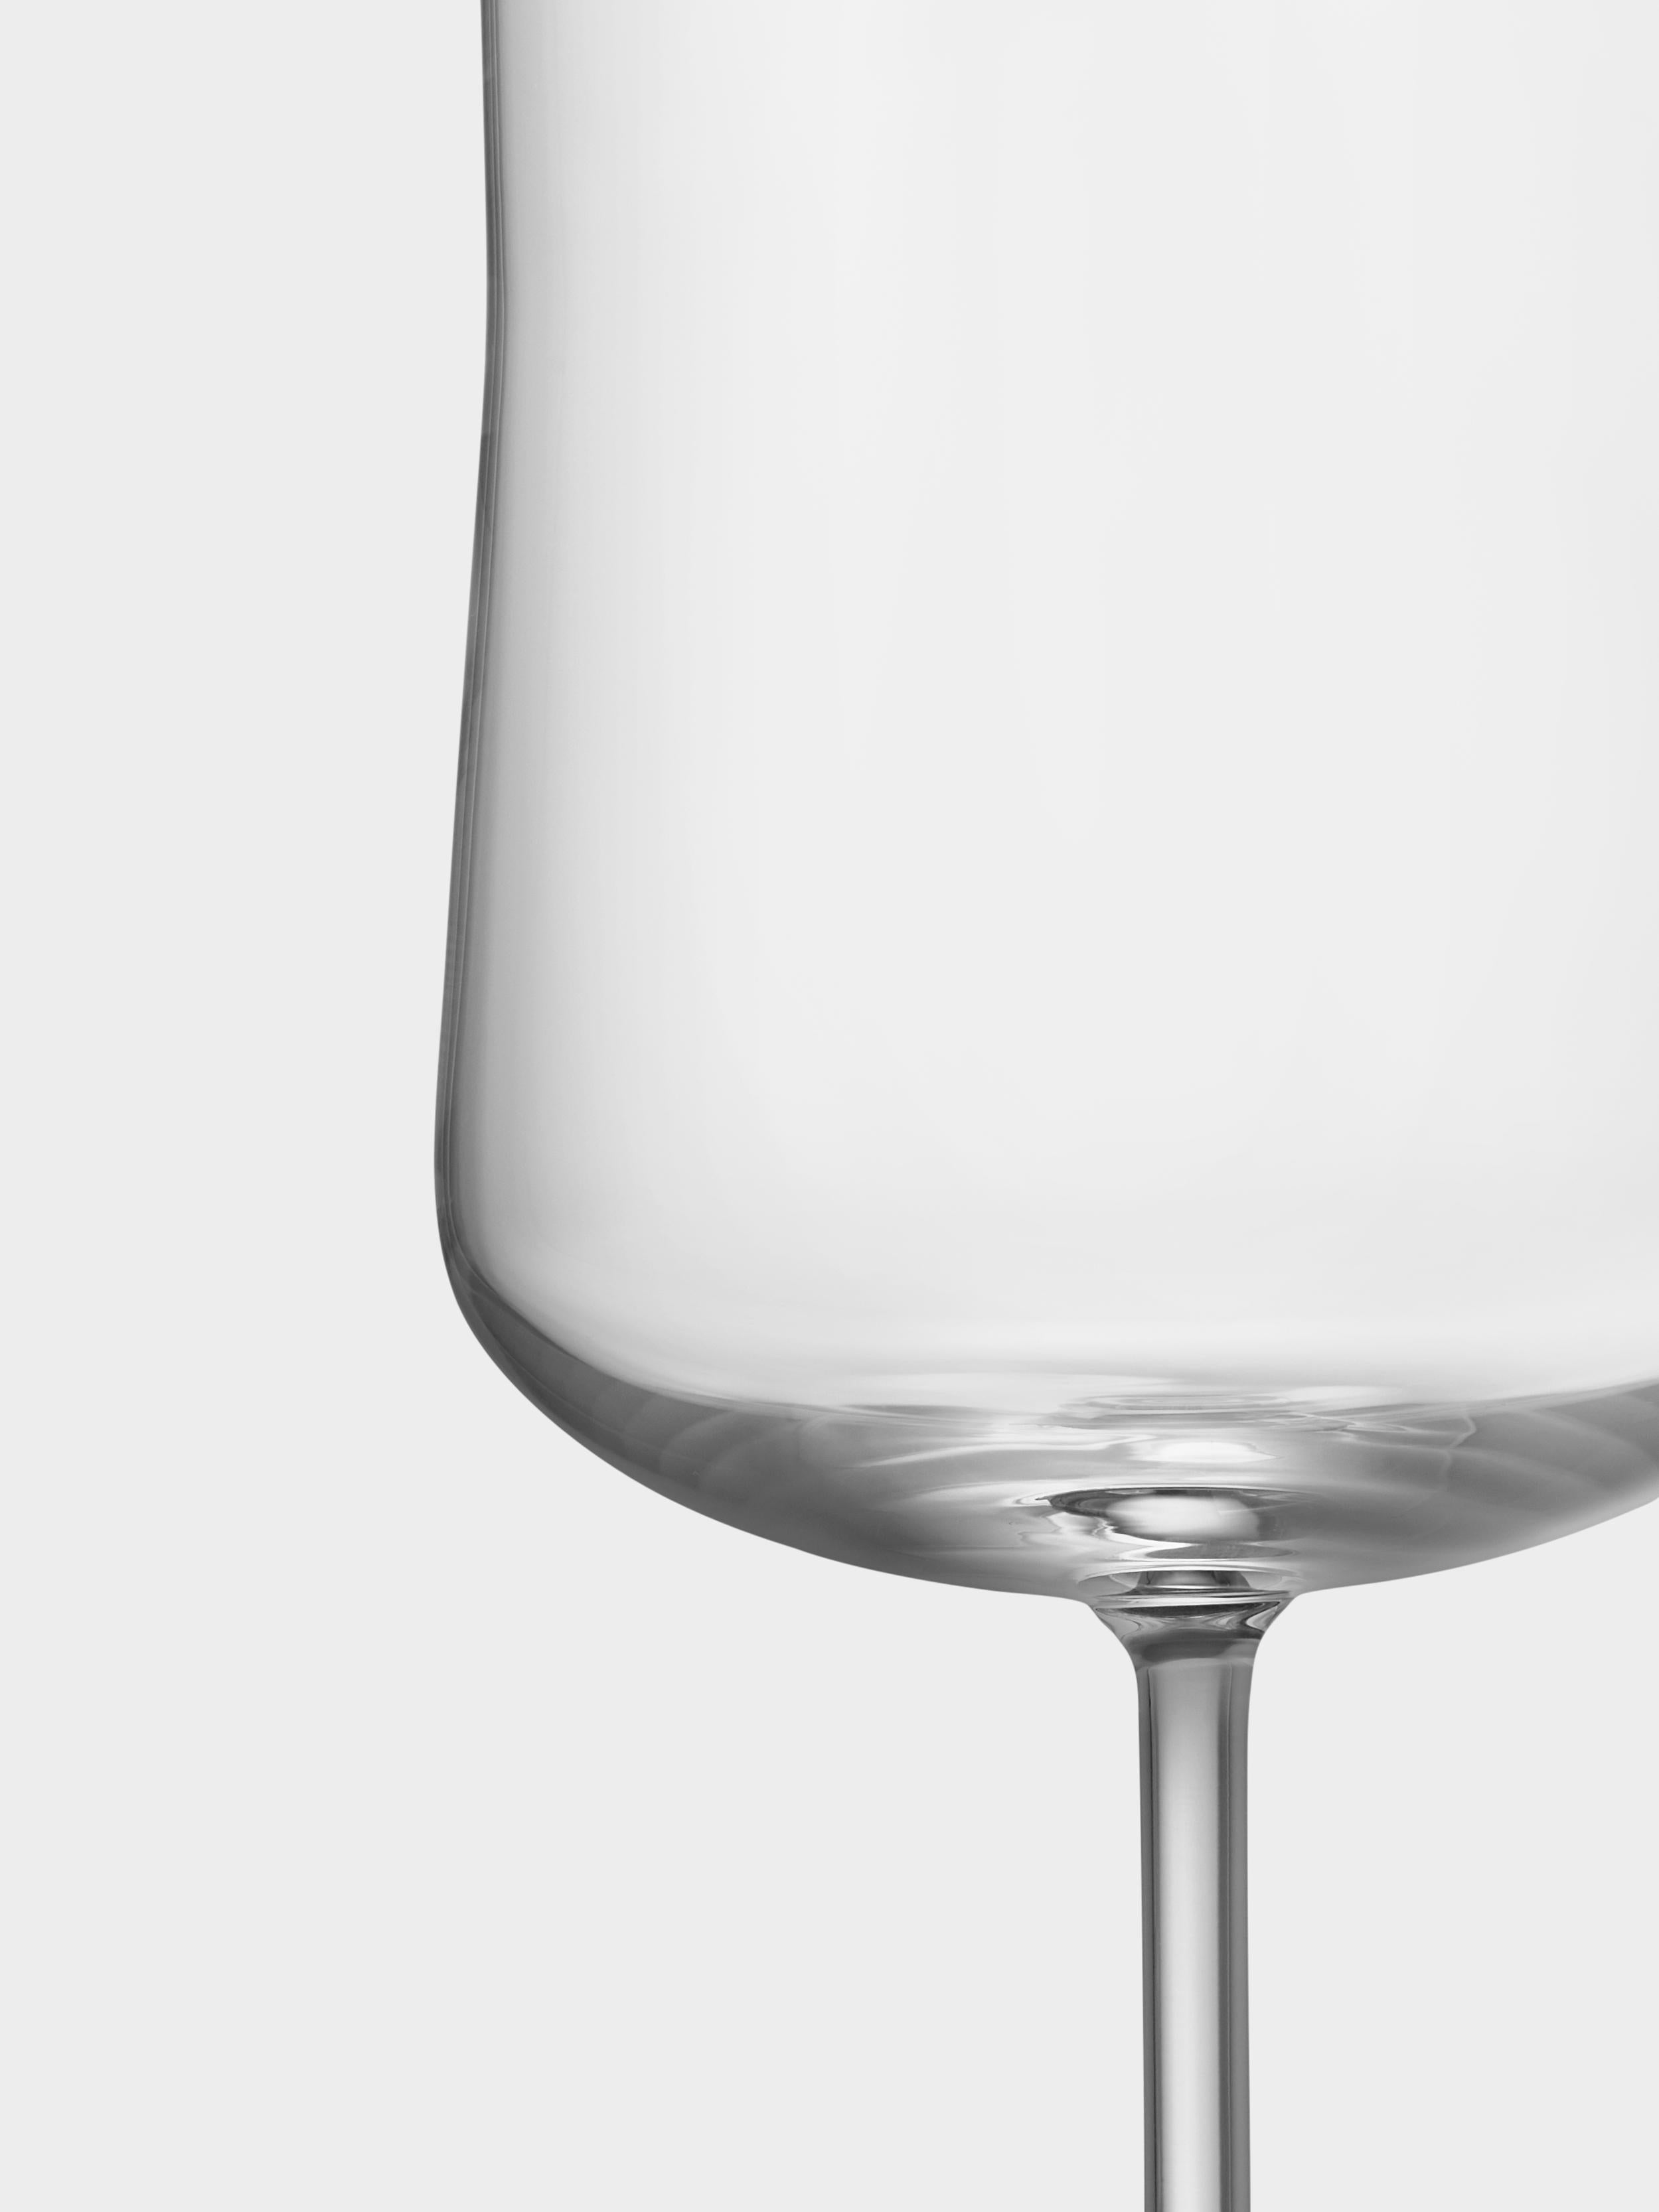 Informal from Orrefors has a contemporary Scandinavian design, and the subtle character of the collection makes it ideal for both formal and casual use. The extra large stem glass holds 20 oz and is outstanding for serving wine, beer, water, or